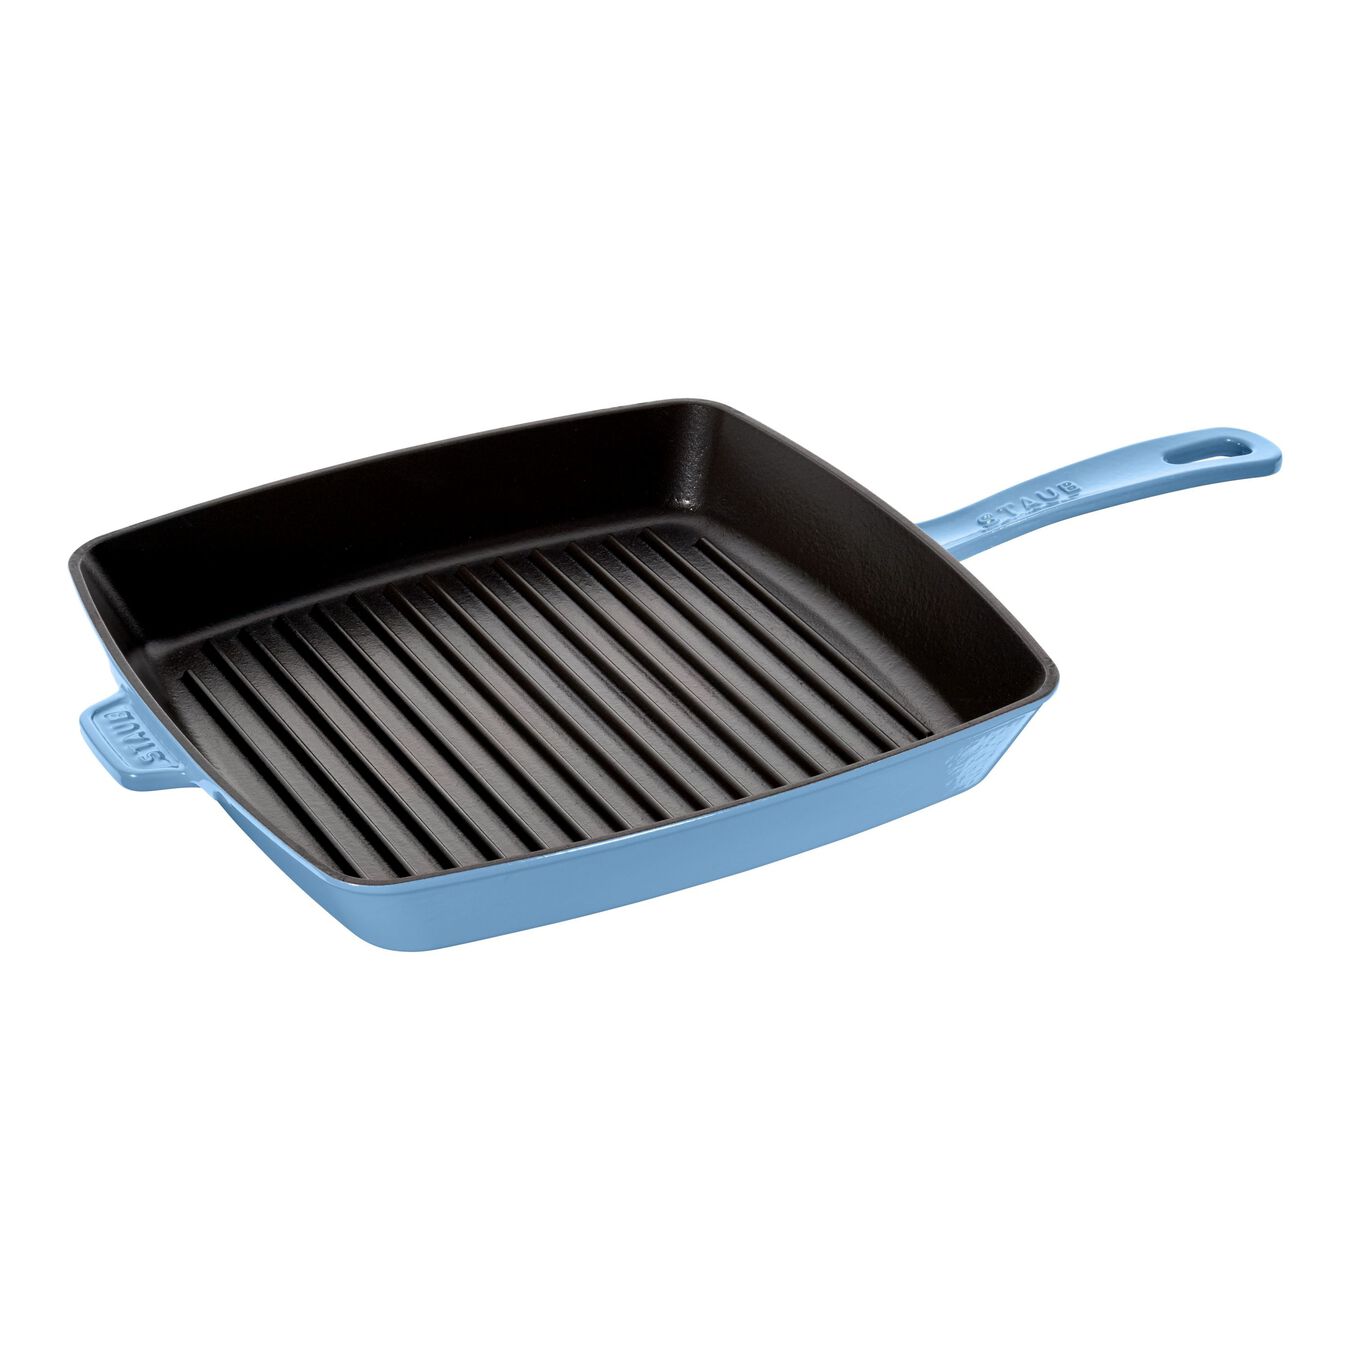 26 cm cast iron square American grill, ice-blue,,large 1